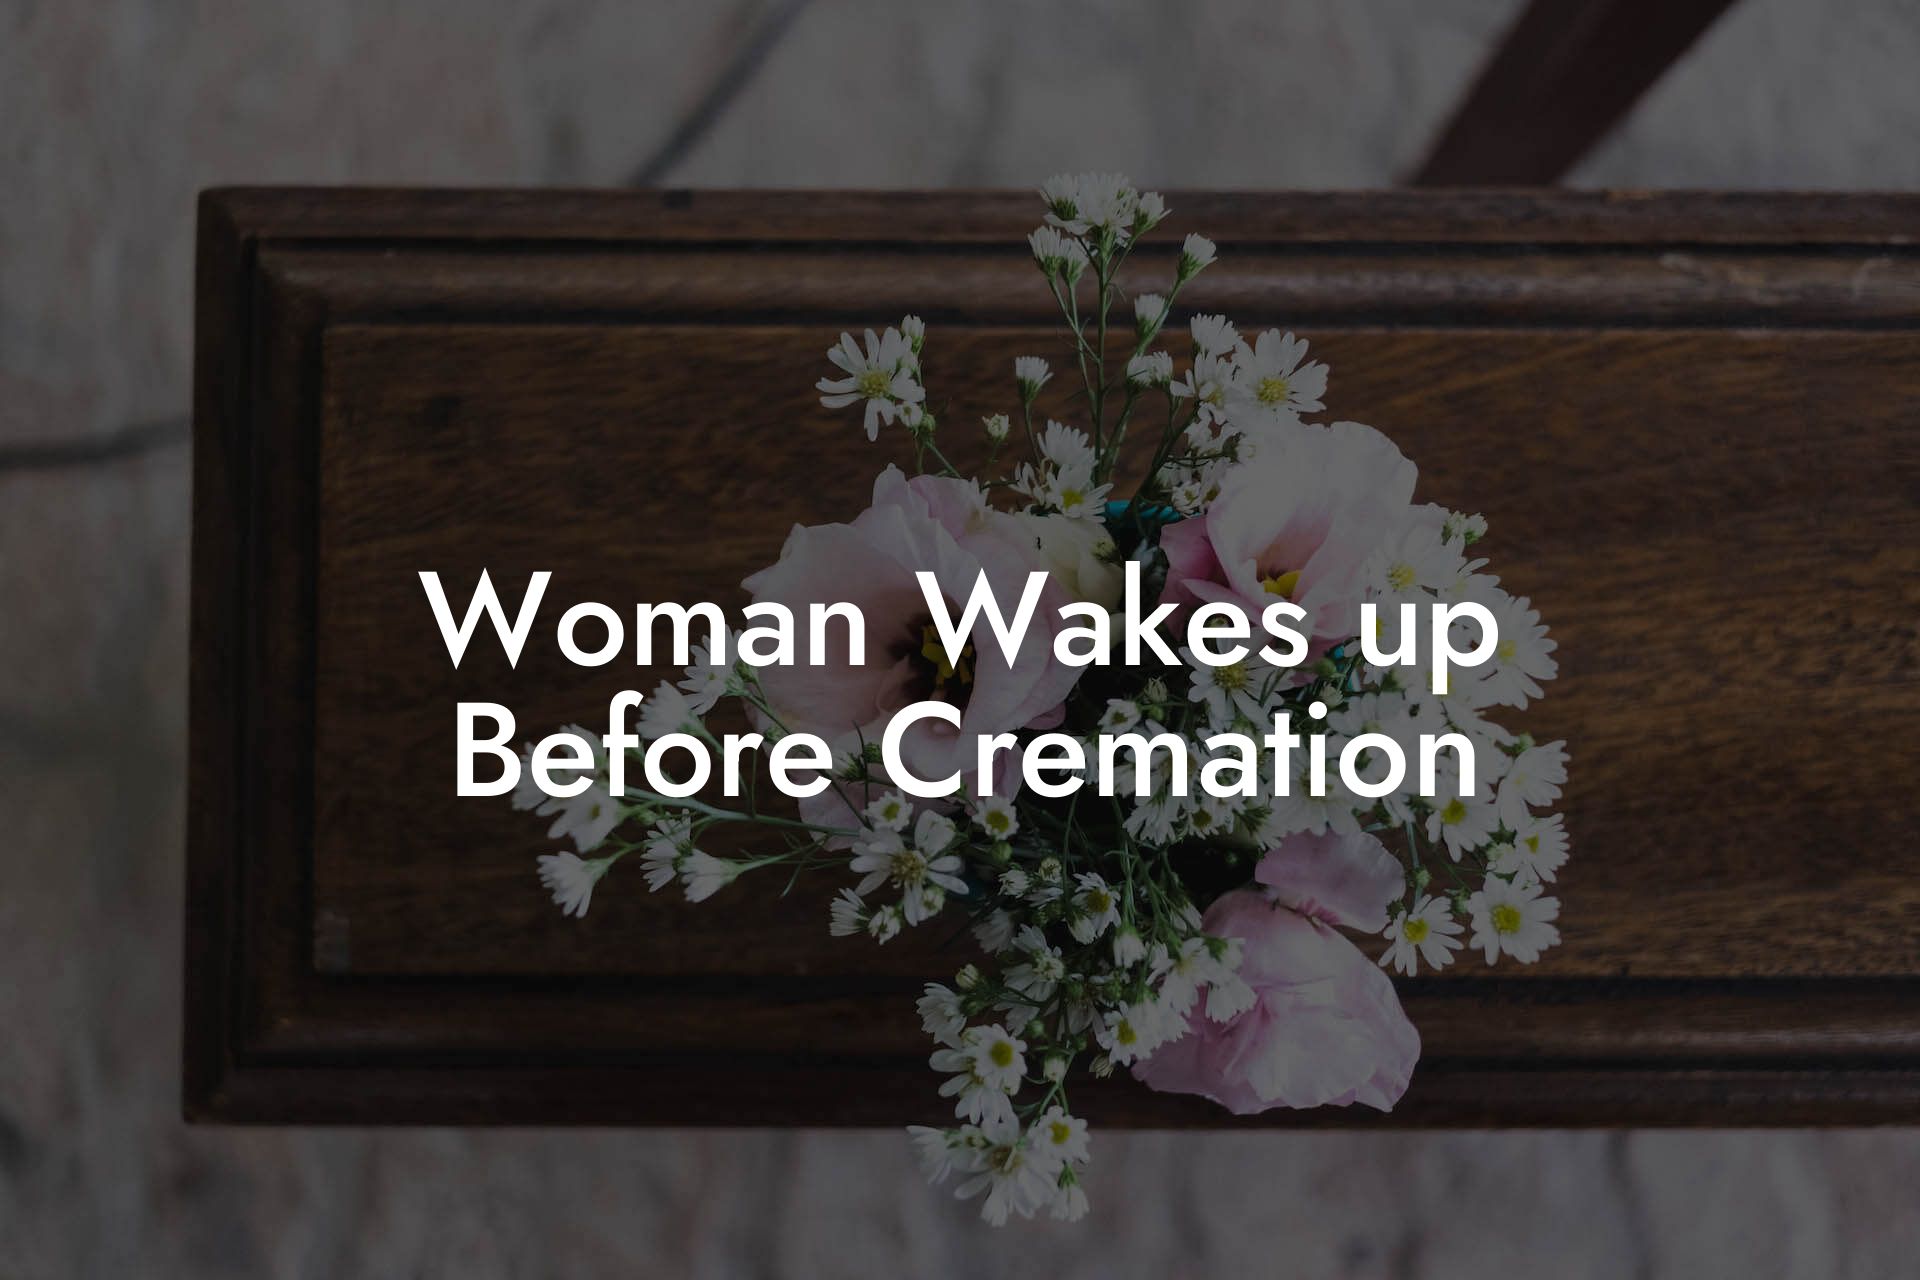 Woman Wakes up Before Cremation